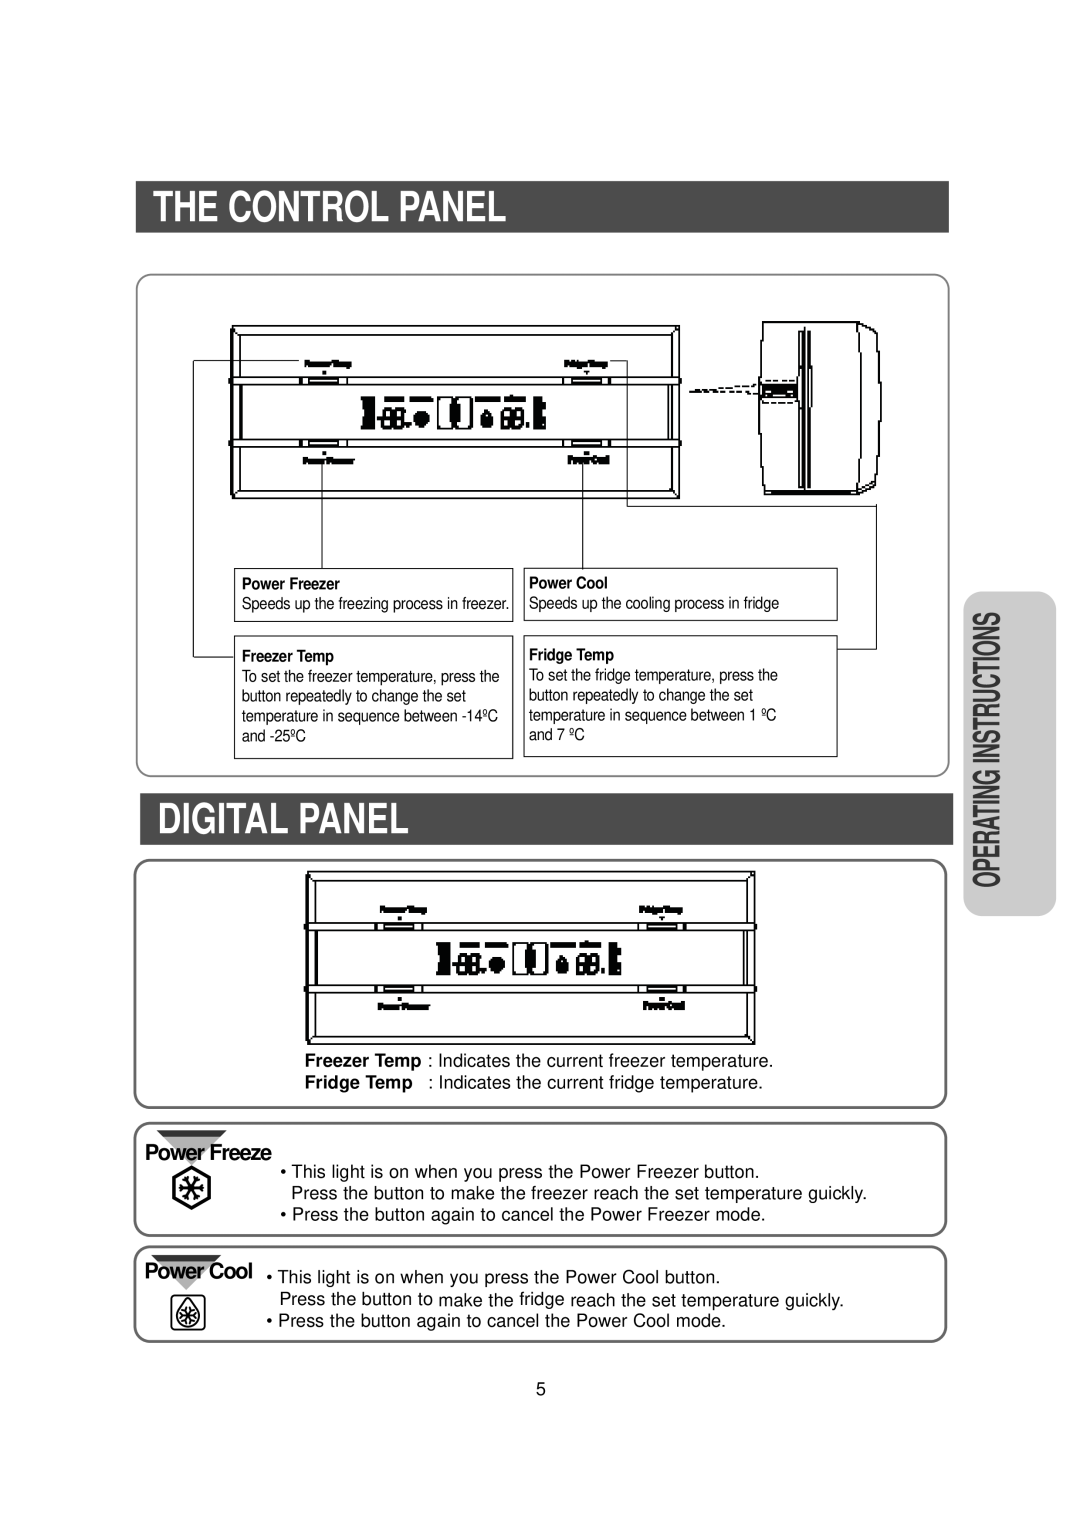 Samsung SRS536NP owner manual The Control Panel, Digital Panel, Power Freeze, Instructions, Operating 